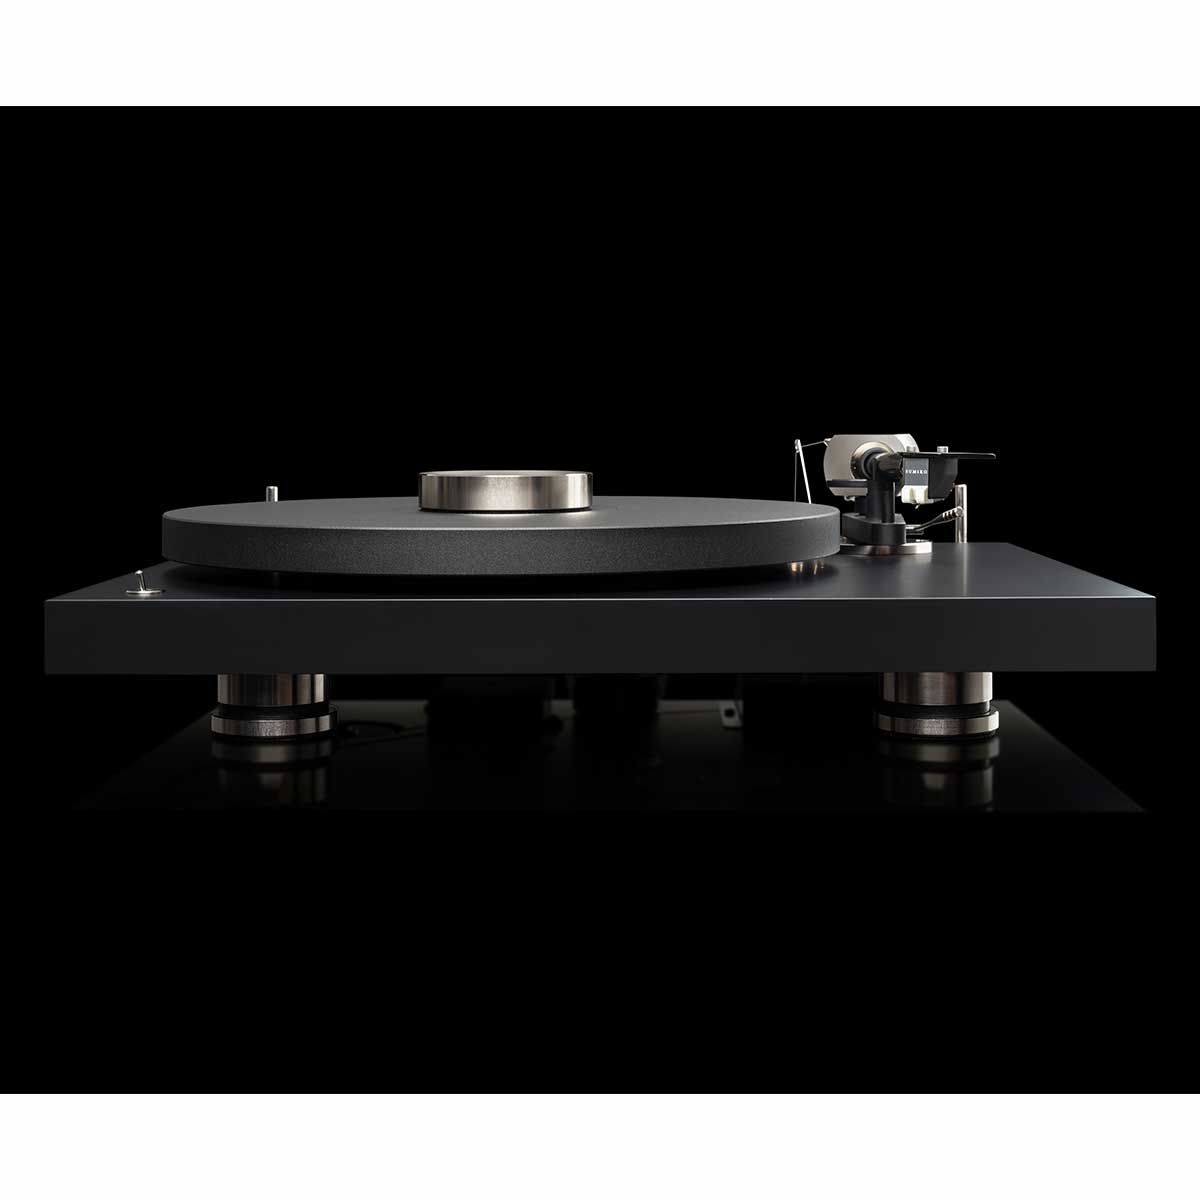 Pro-Ject Debut PRO Turntable, Satin Black, front view on black background